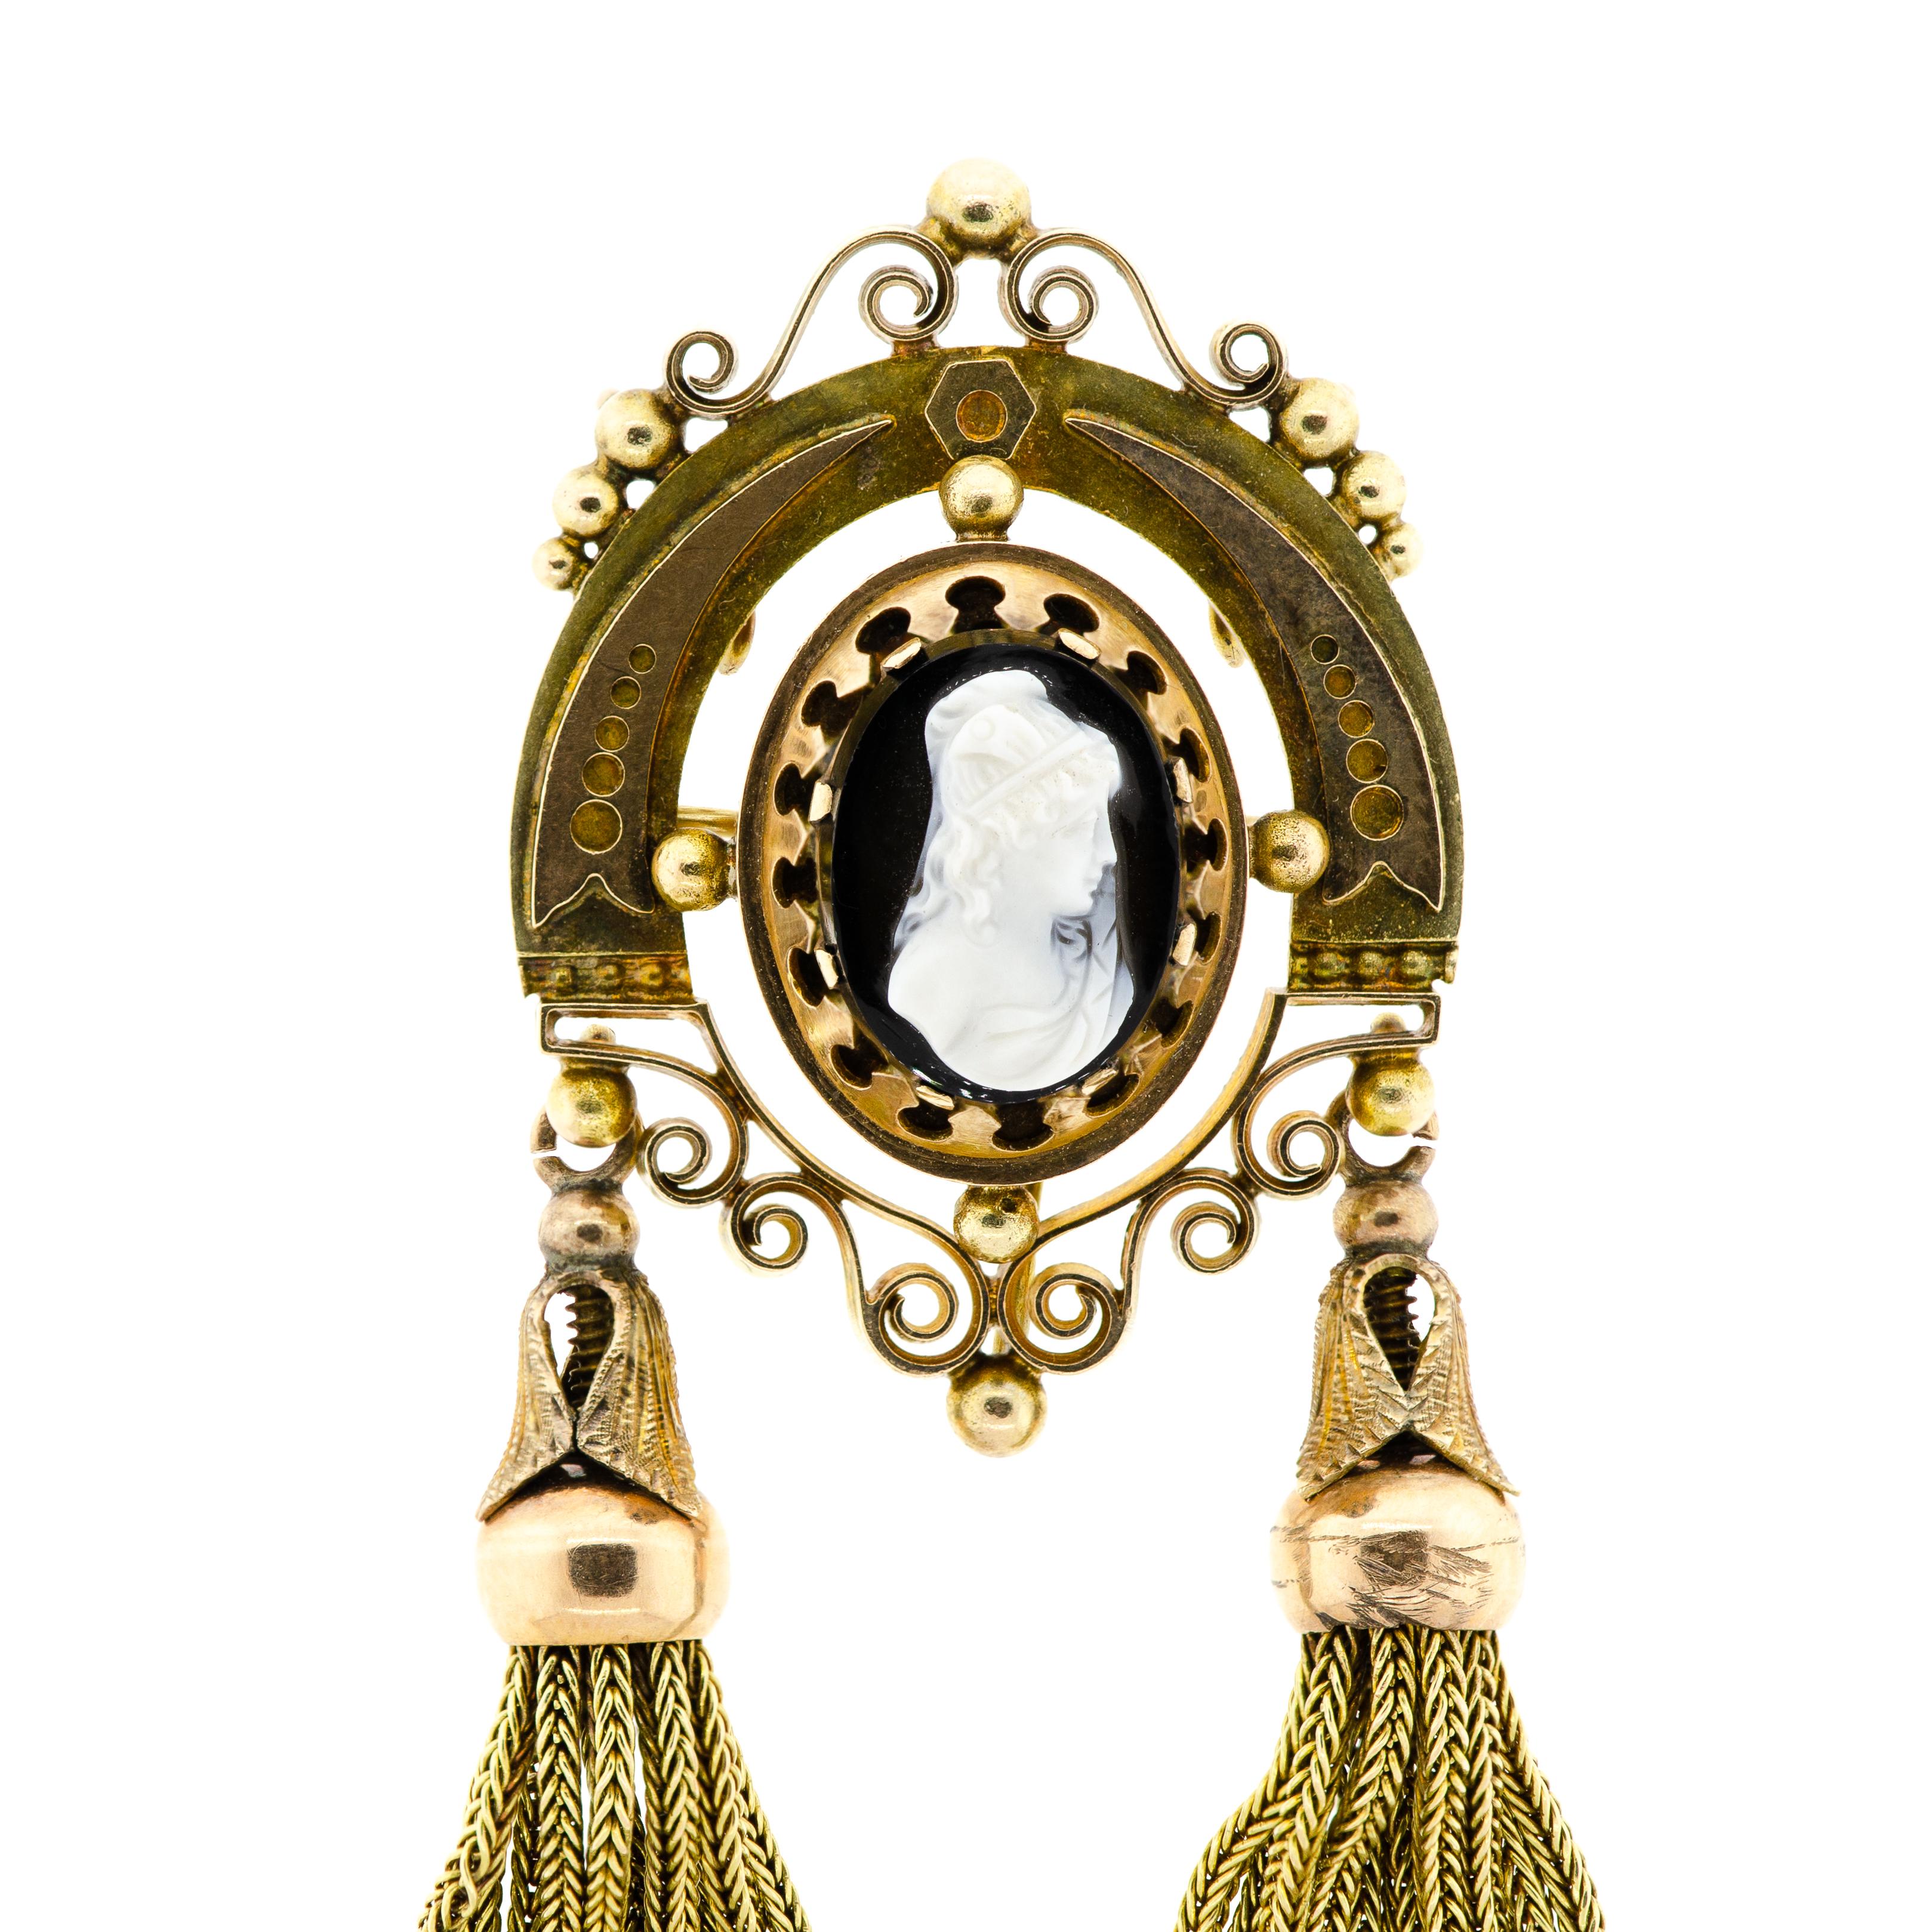 This is a stunning Victorian-era piece of jewelry that dates back to the year 1870. The 14Kt yellow gold and black/white hardstone cameo depicts a beautiful woman in profile and features wonderful tassel drops, as well as lovely scrolled and applied